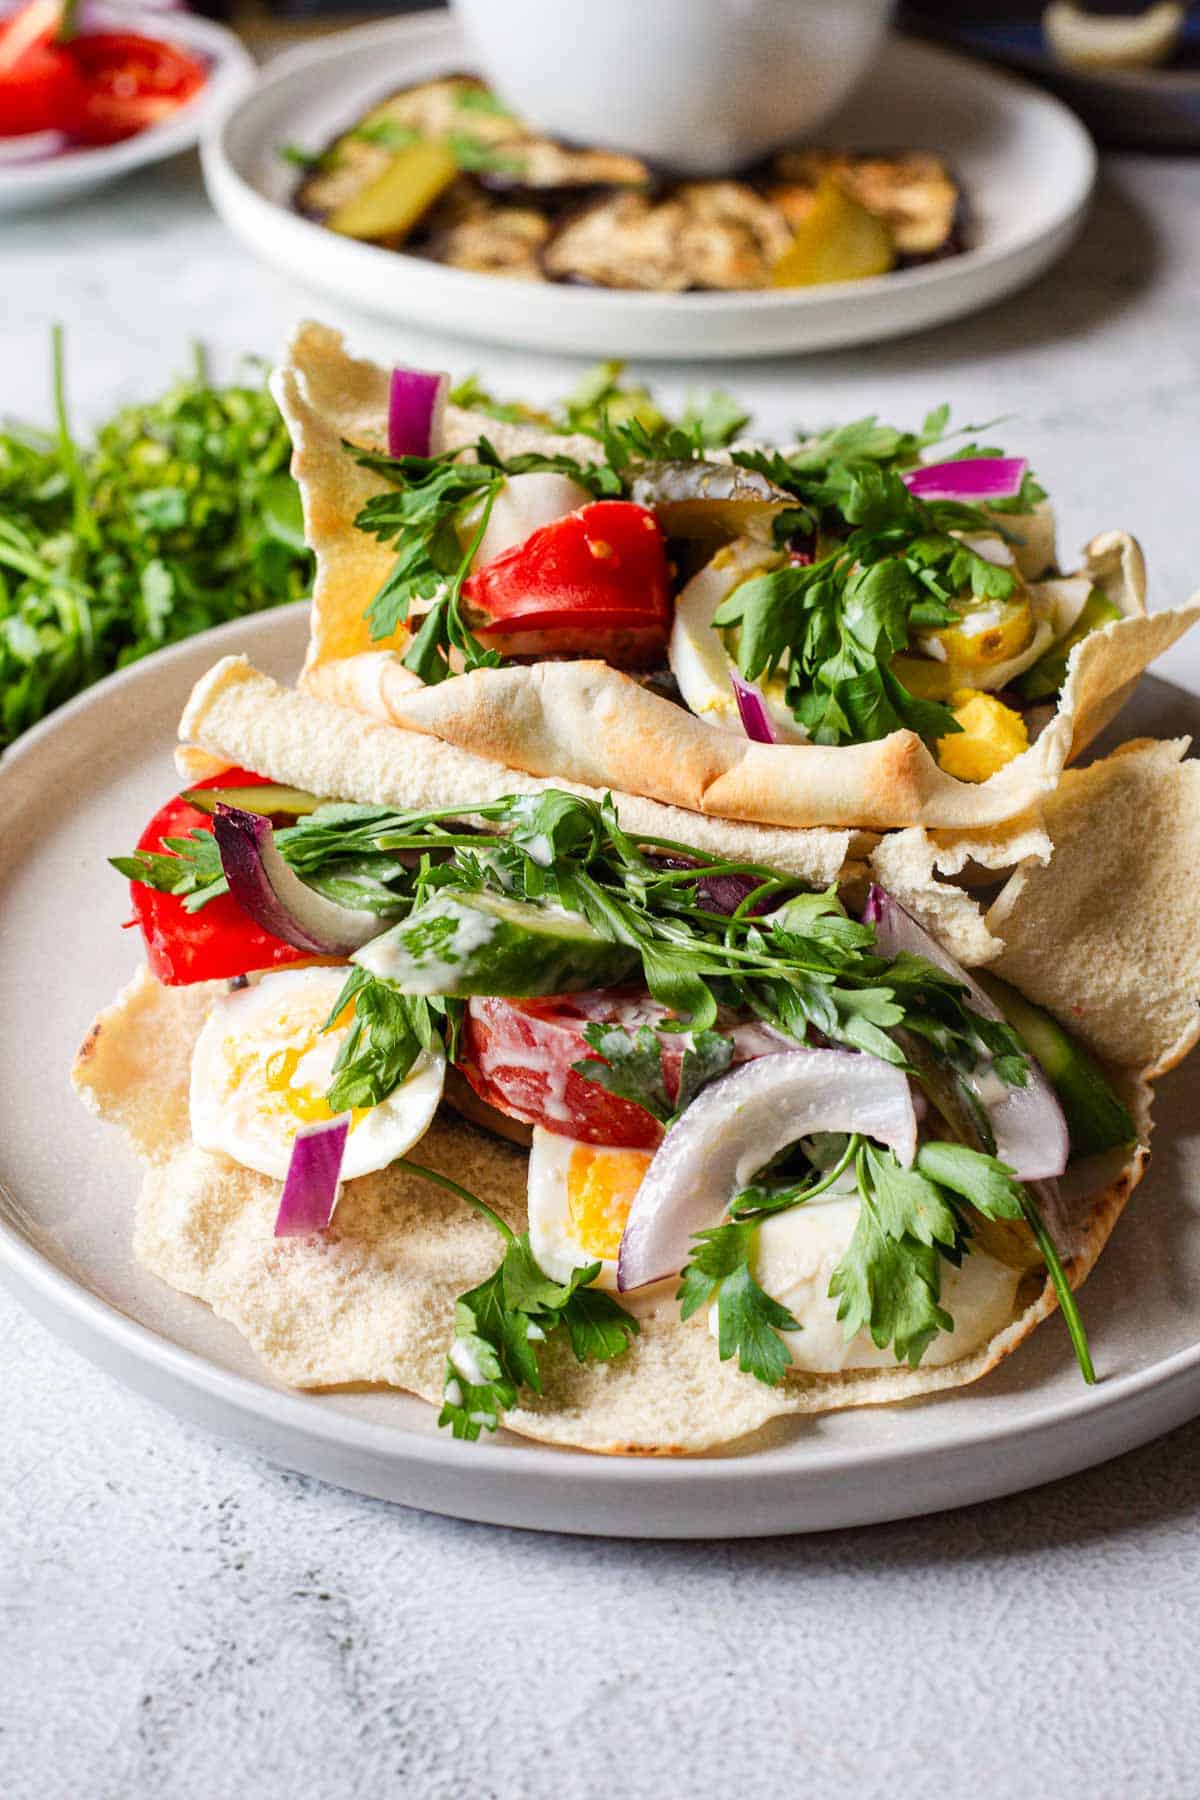 A plate of pita bread with vegetables and eggs on it.